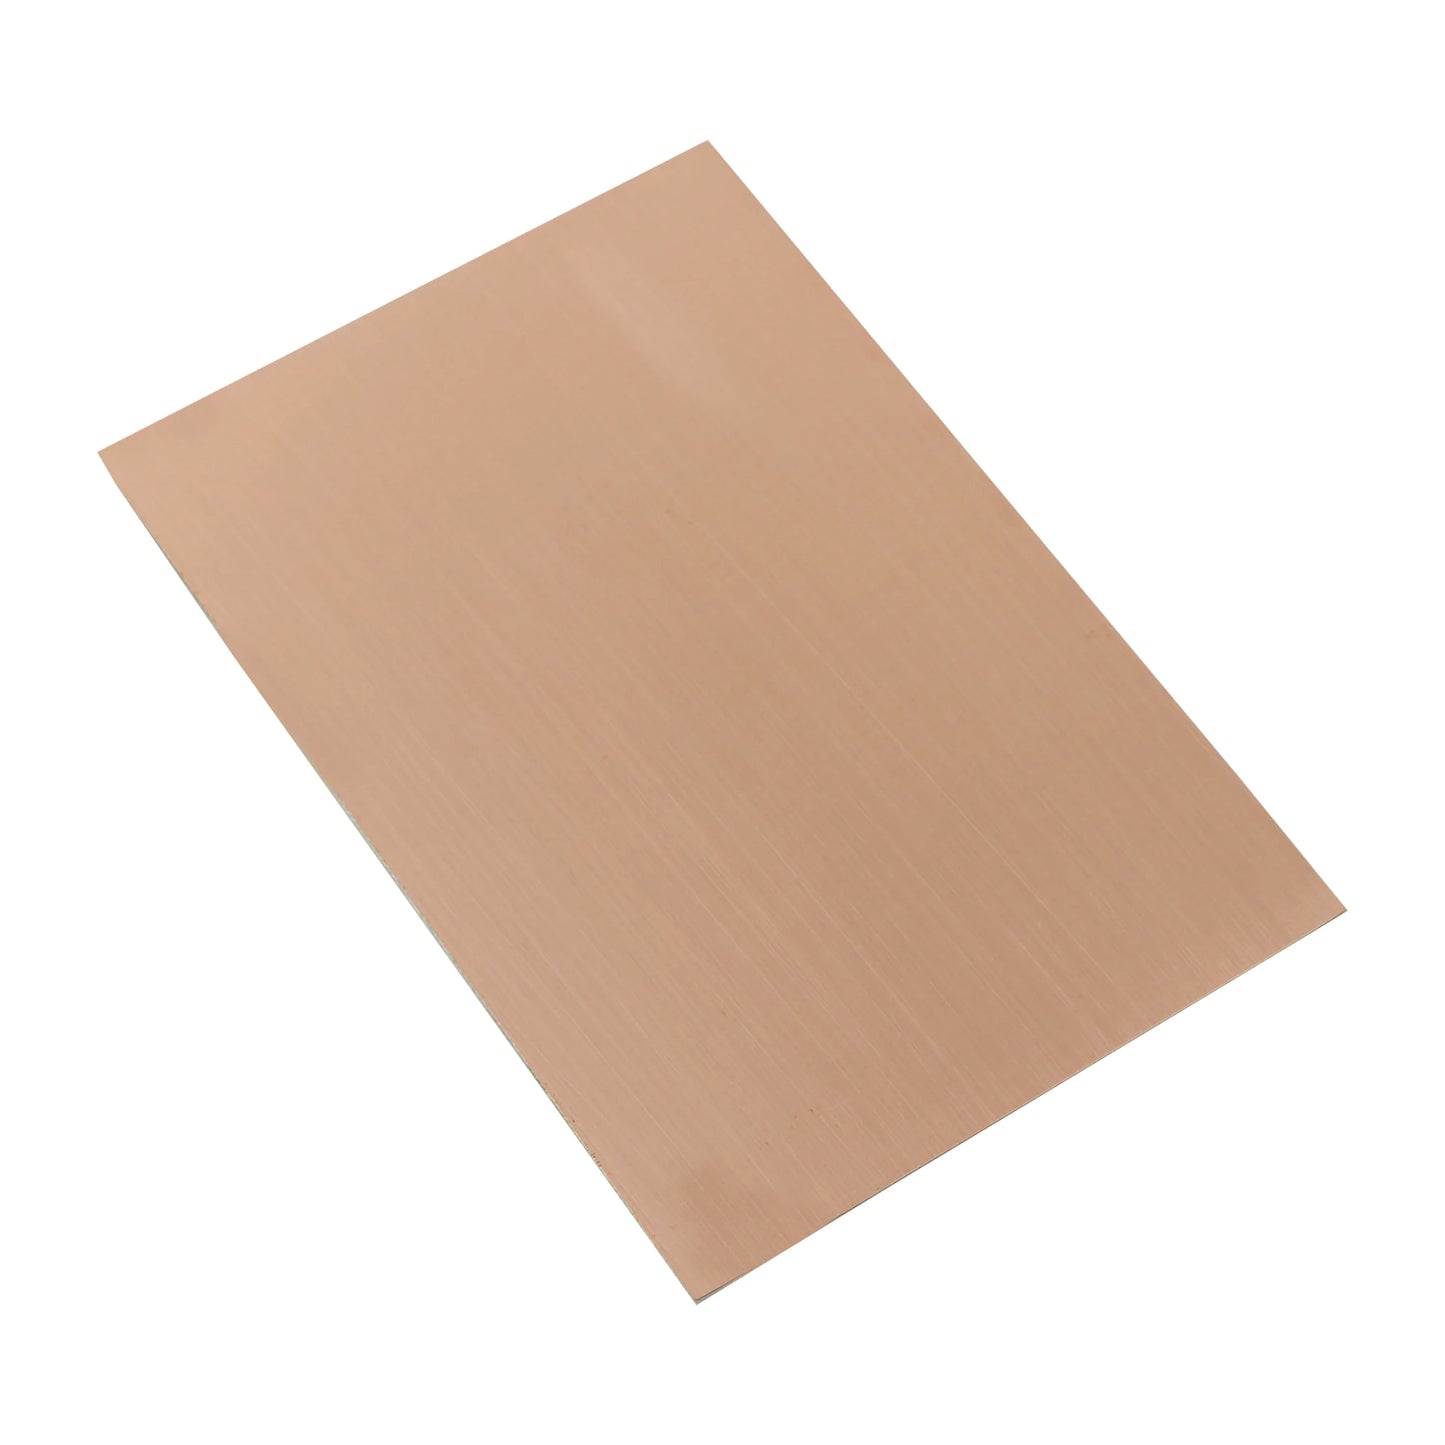 0.1 mm Thin DOUBLE Side Copper Clad Laminate Circuit Board 6 X 4 Inch (FR4 Glass Epoxy PCB) - 5 Units